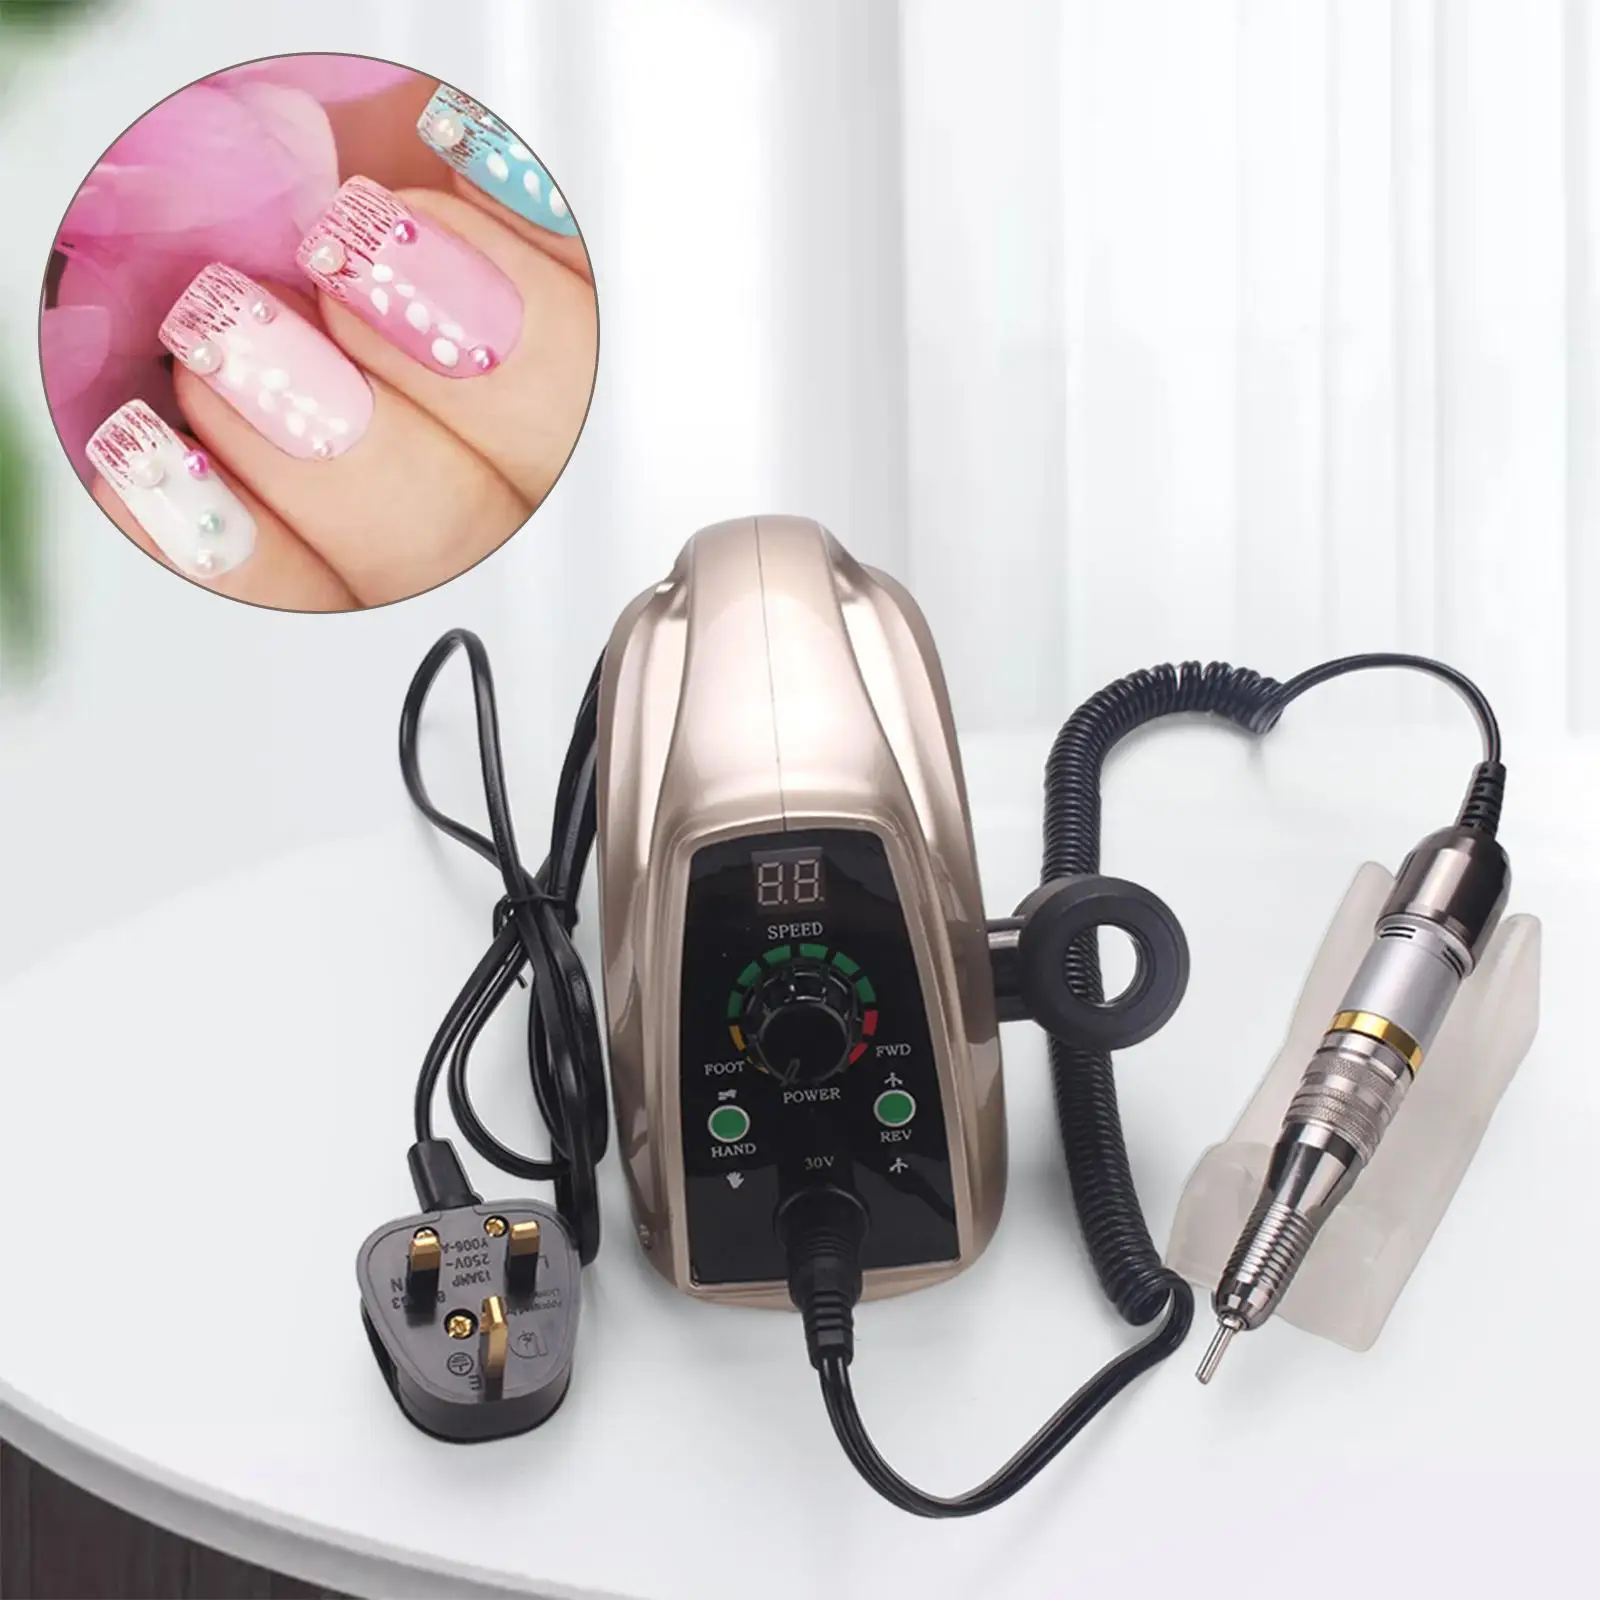 Professional Electric Nail Drill Machine 35000 RPM for Shaping Polisher Acrylic Nails UK